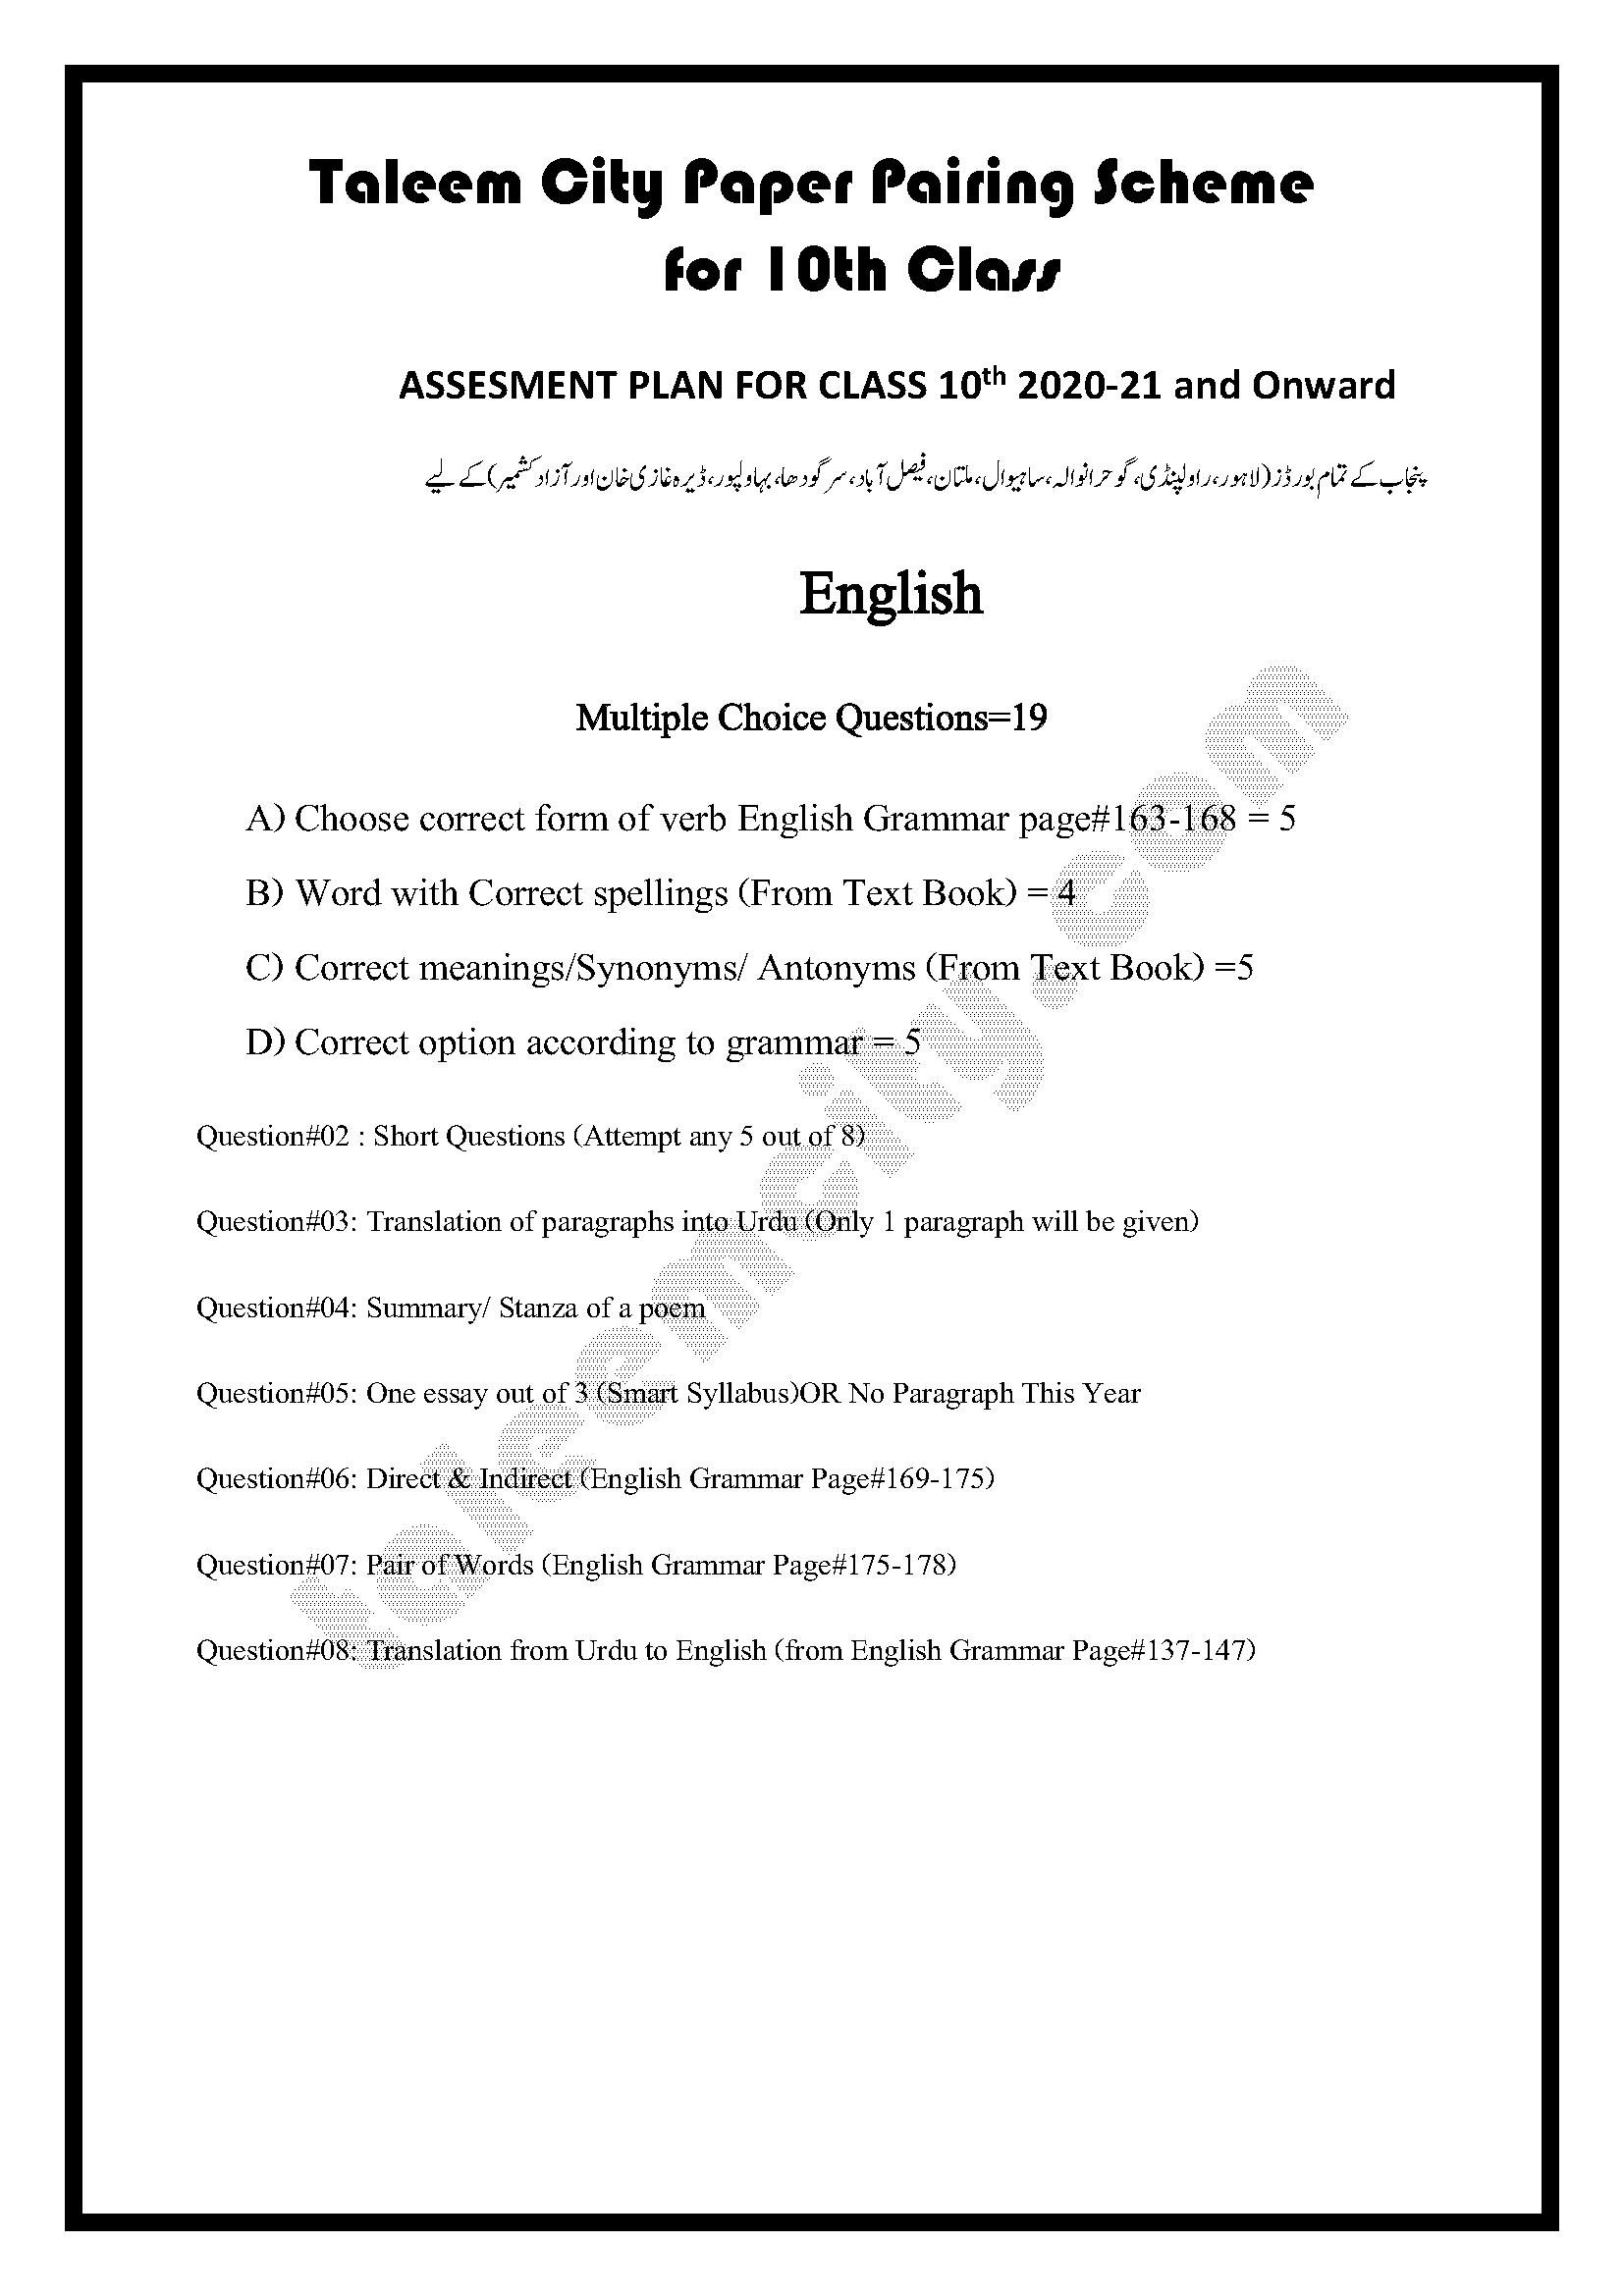 10th class english assignment